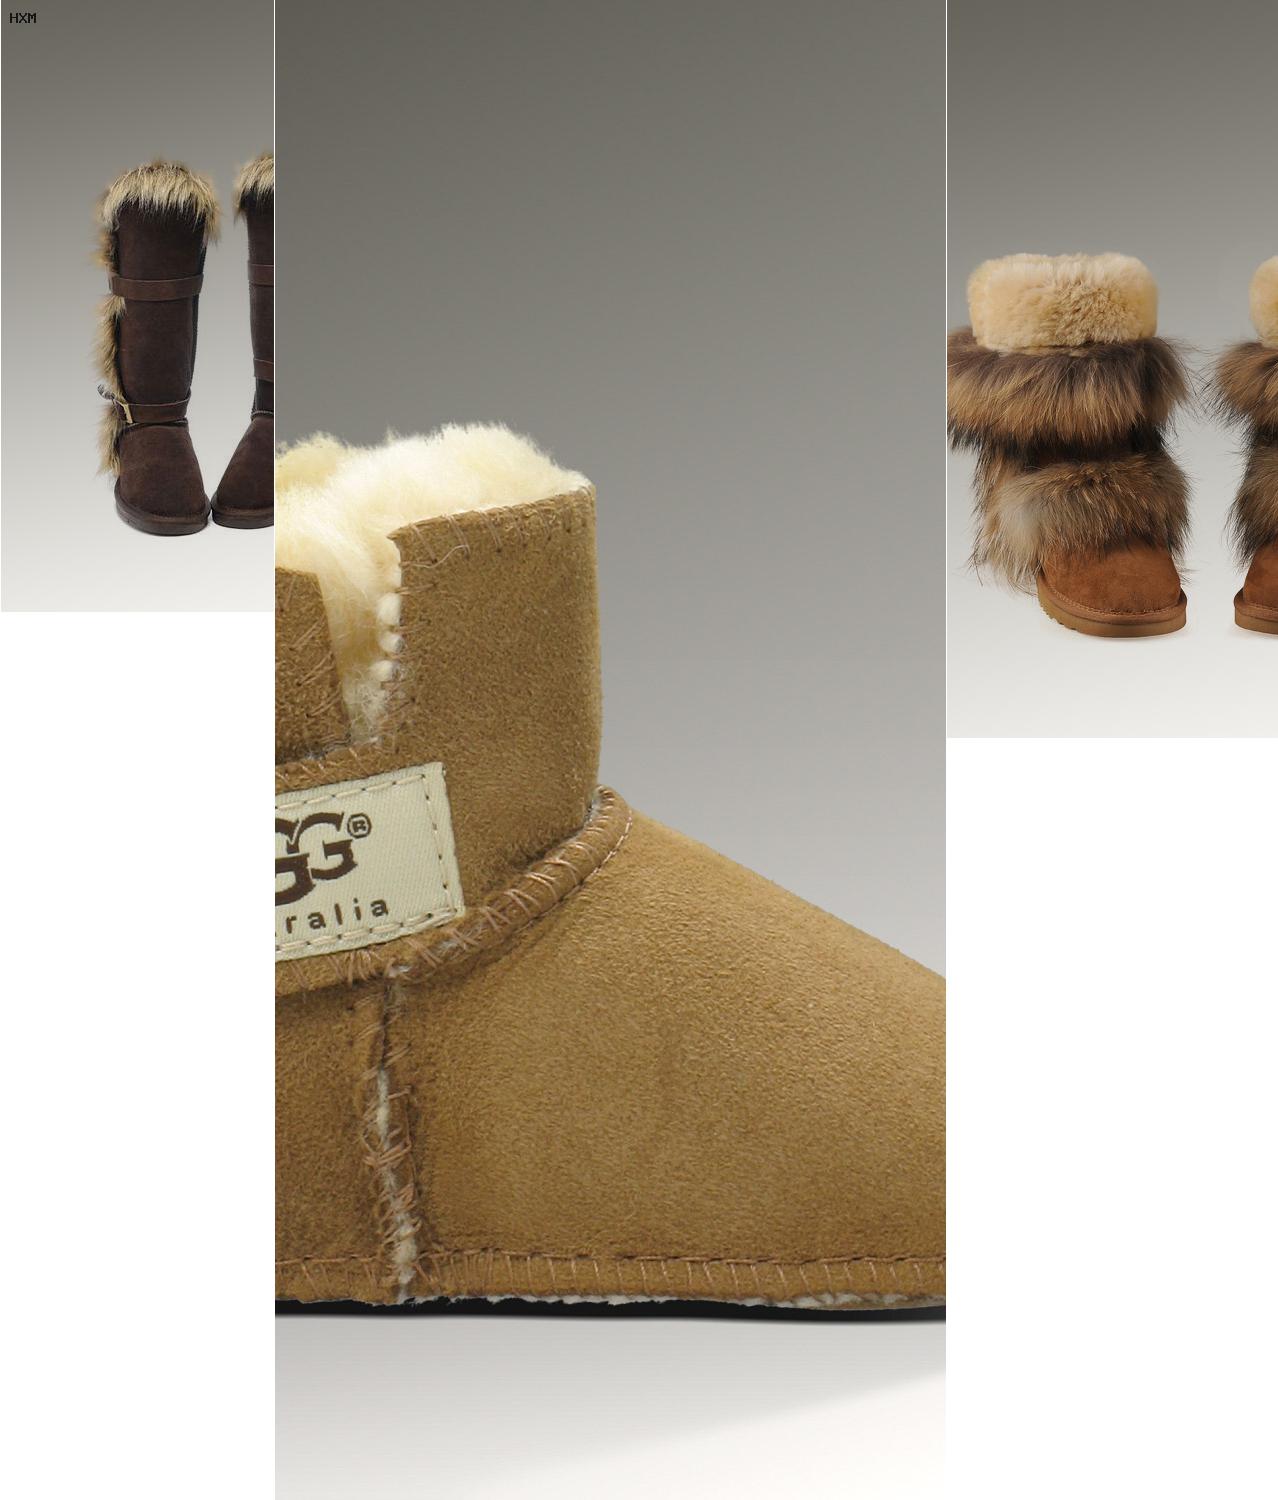 ugg authorized online retailers